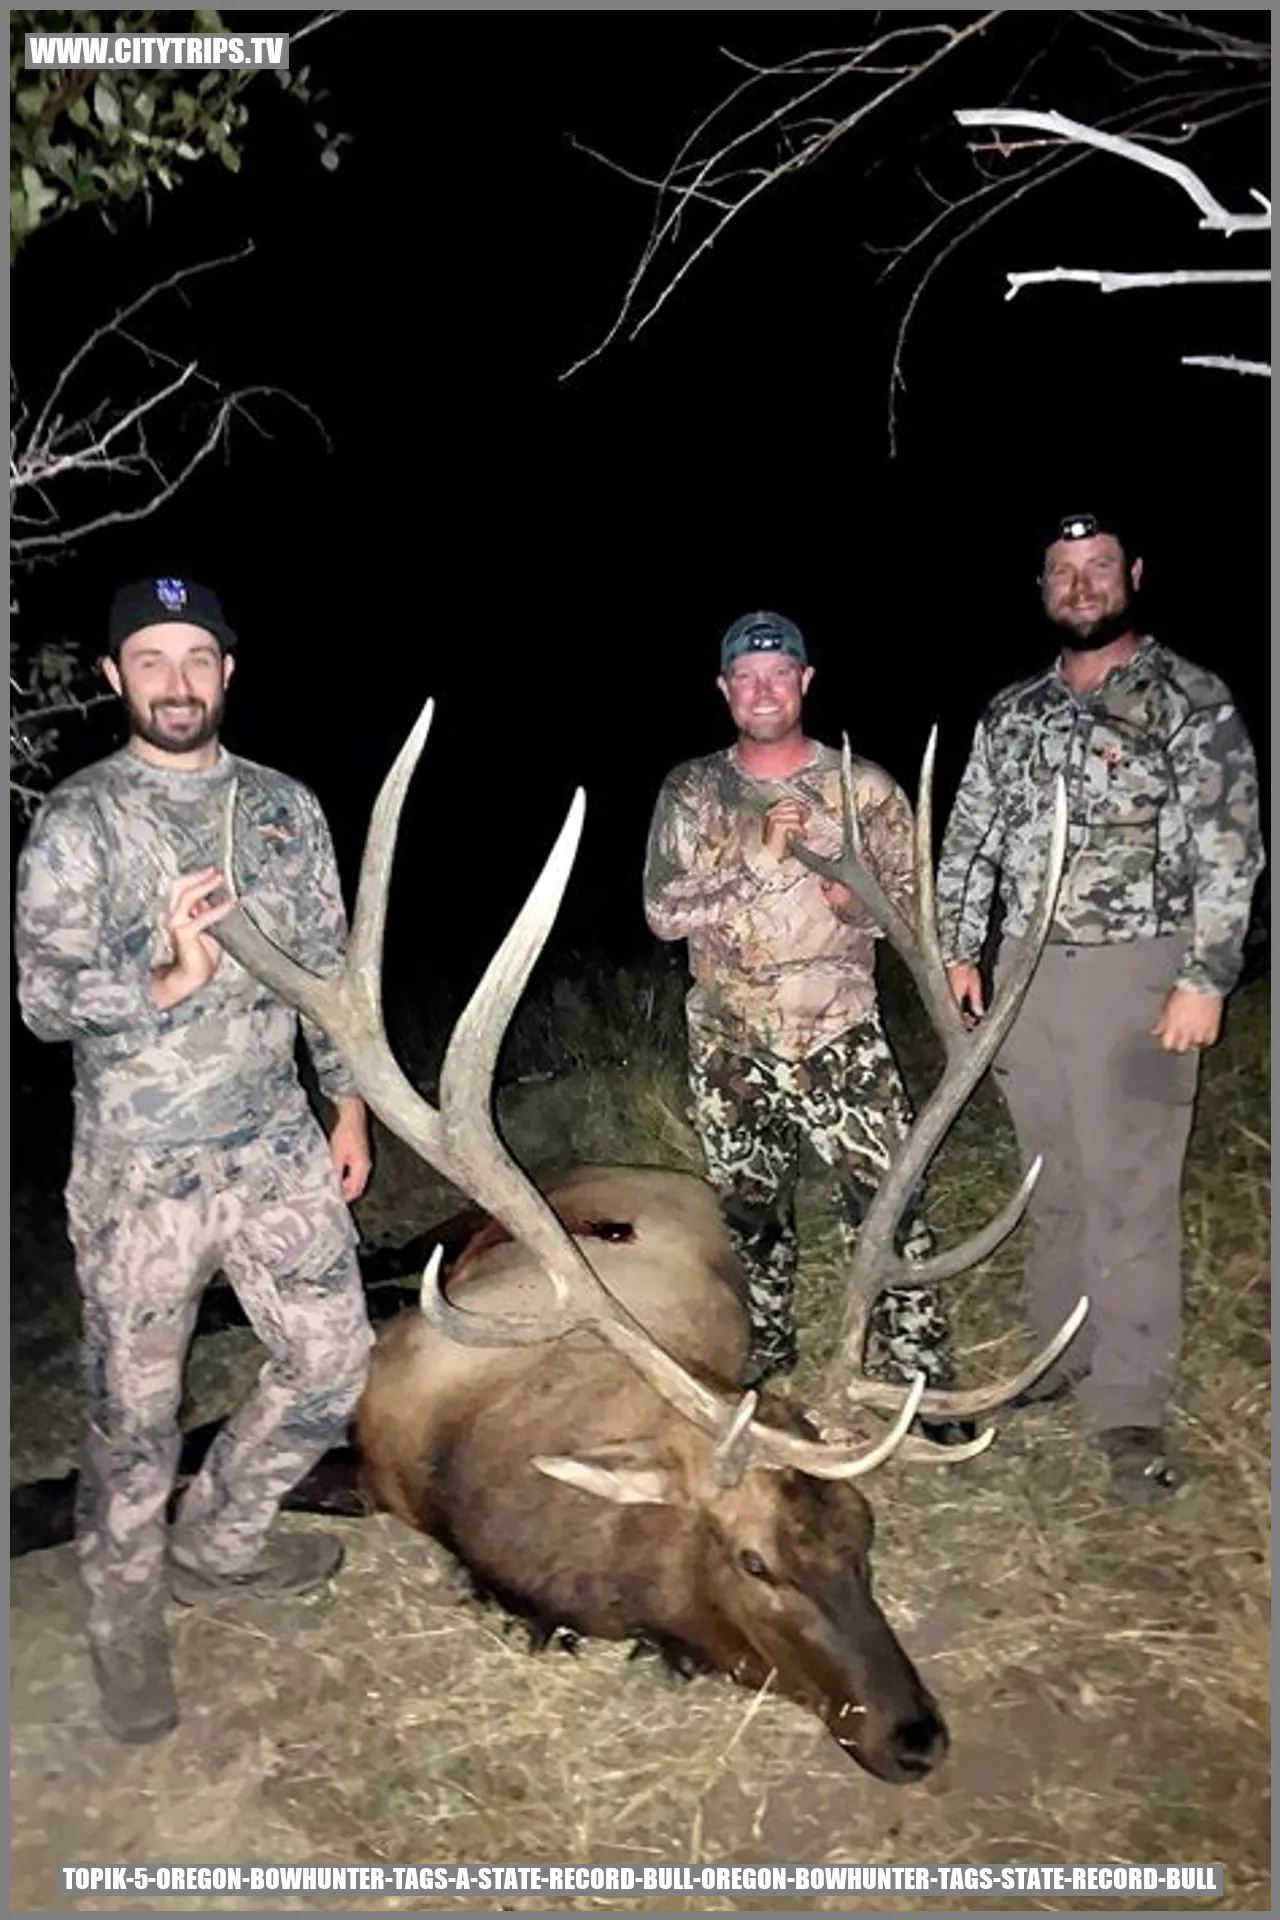 Oregon Bowhunter Tags a State Record Bull